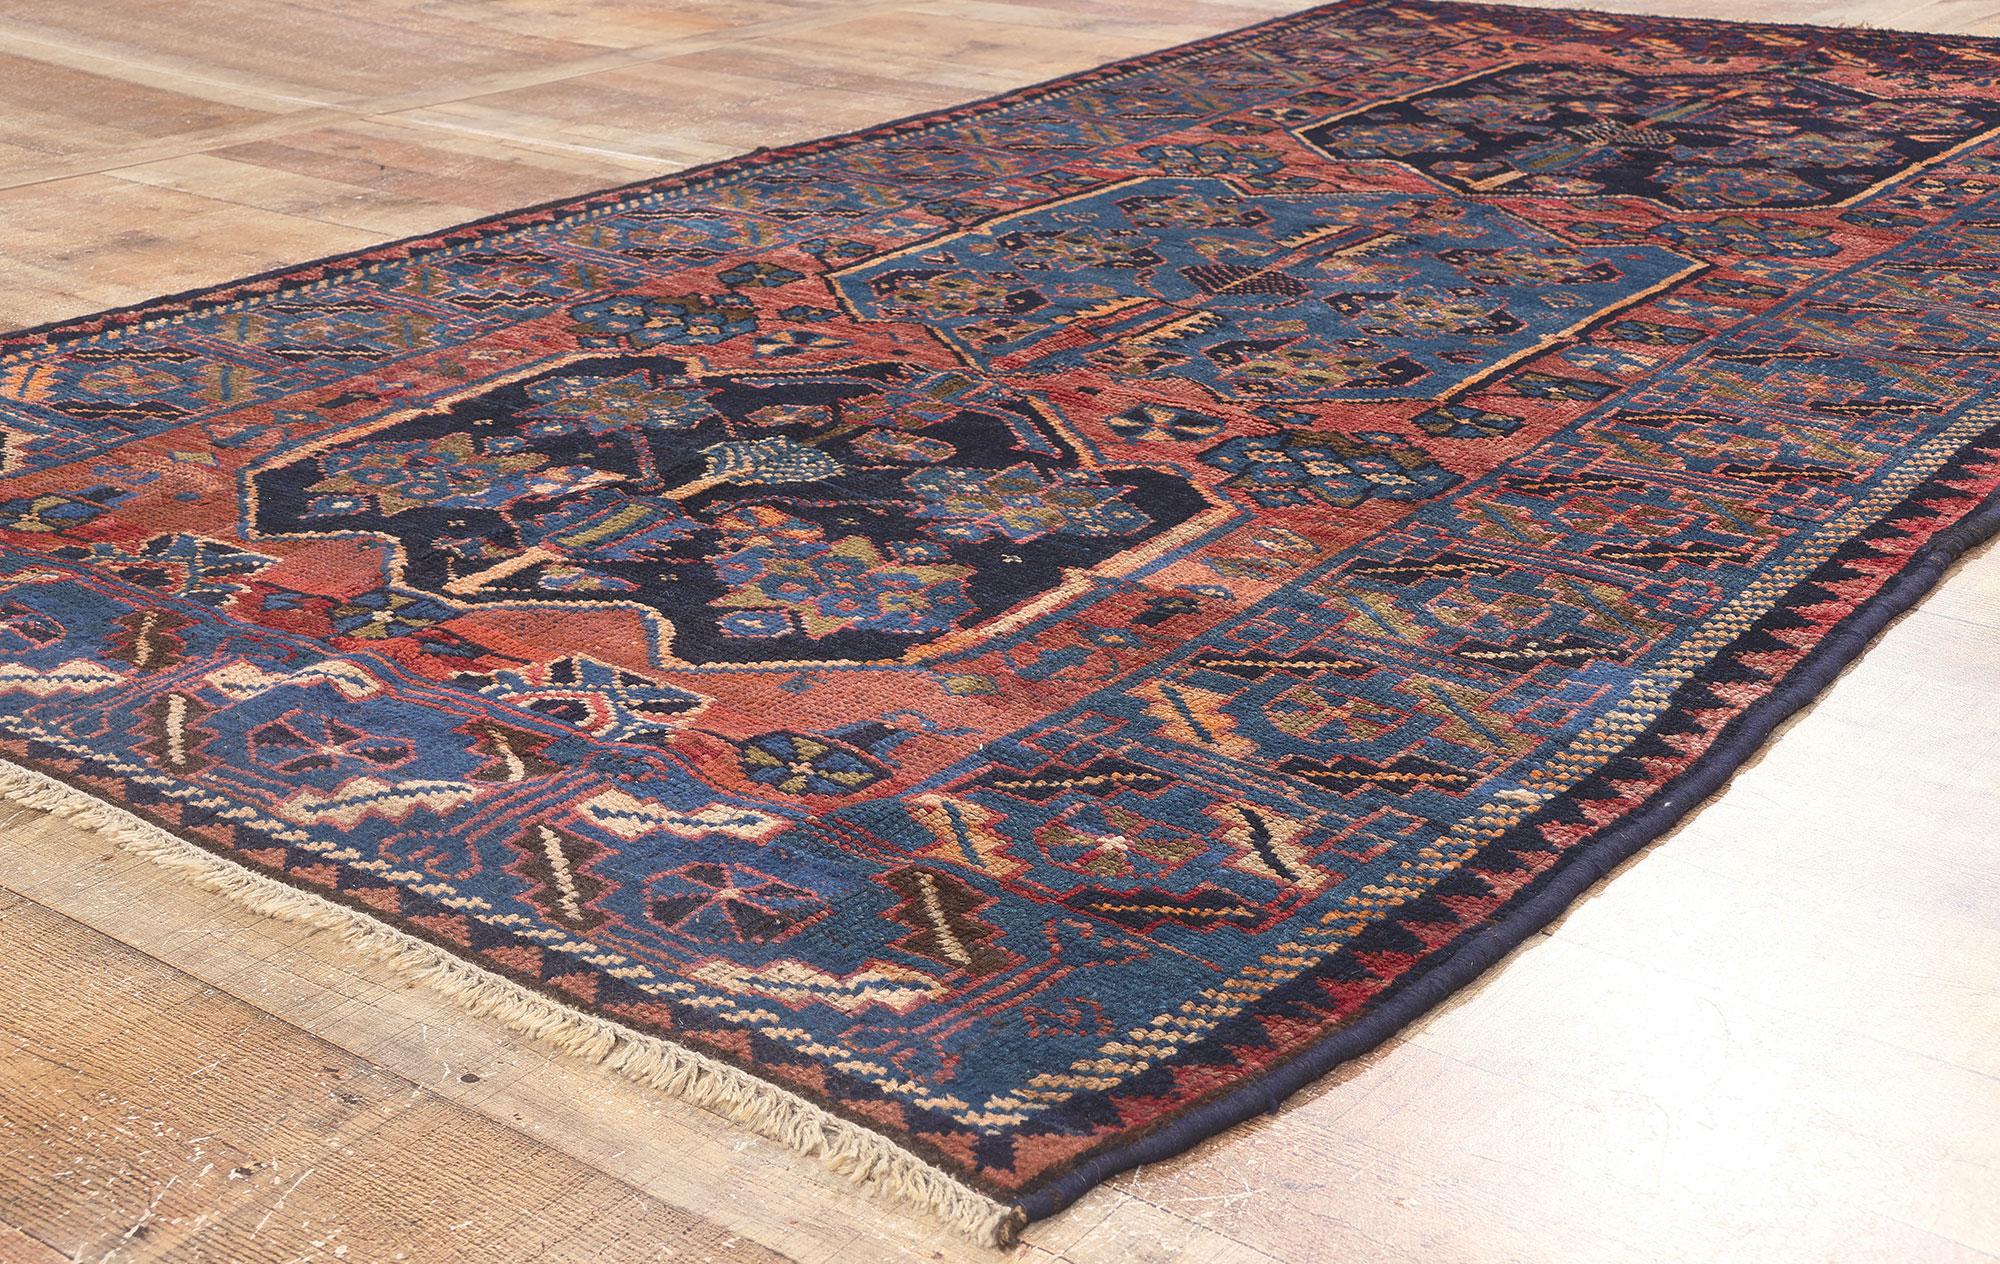 Antique Persian Tribal Shiraz Rug with Qashqai Tribe Influence For Sale 1